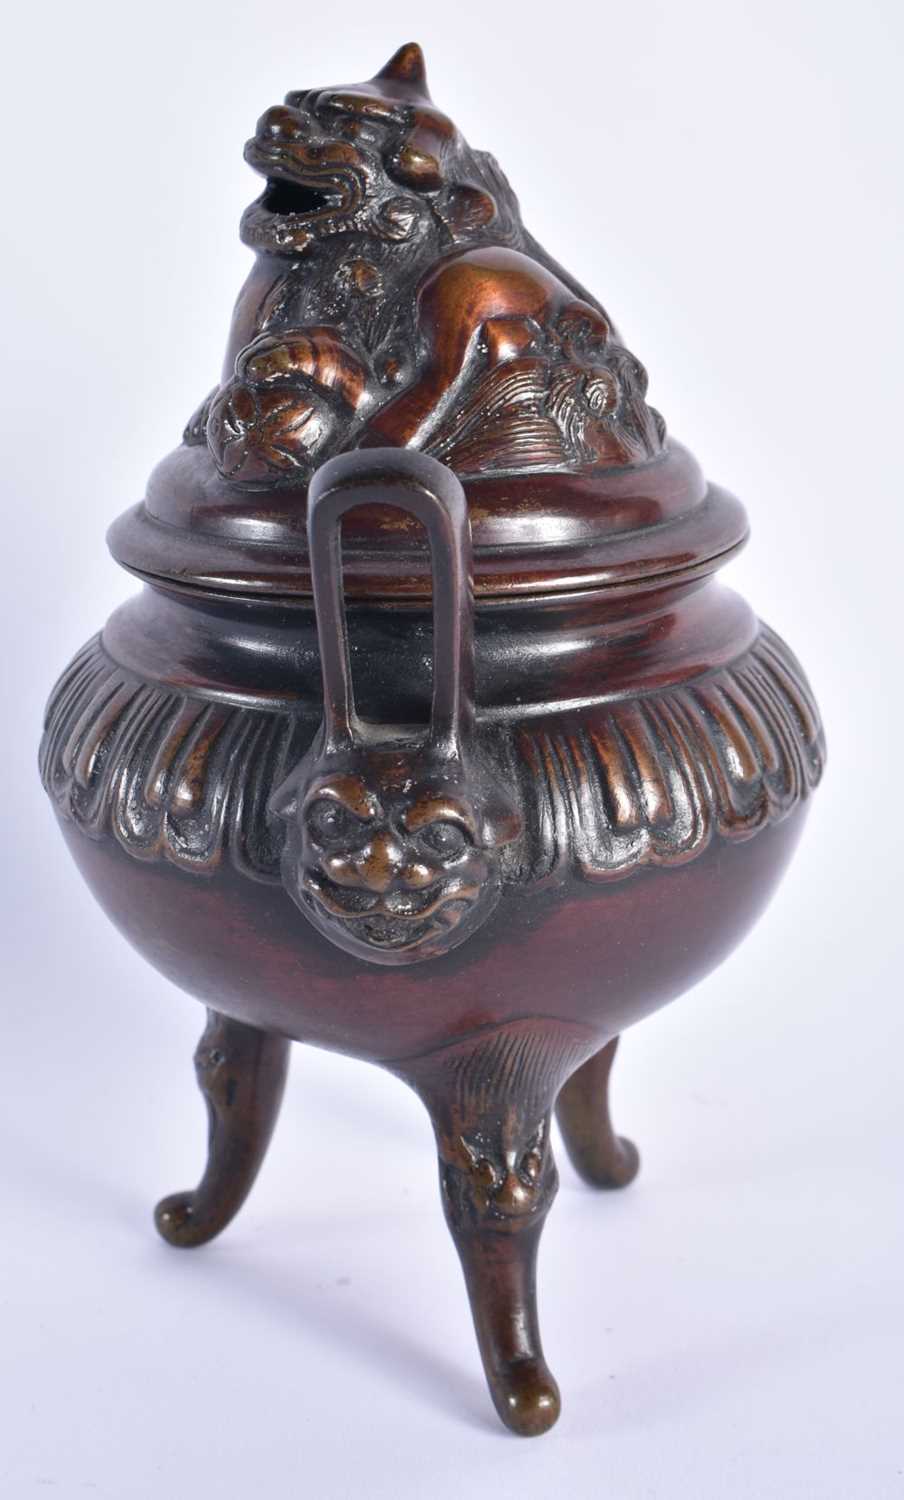 A LATE 19TH CENTURY JAPANESE MEIJI PERIOD BRONZE CENSER AND COVER. 18cm x 10 cm. - Image 3 of 6